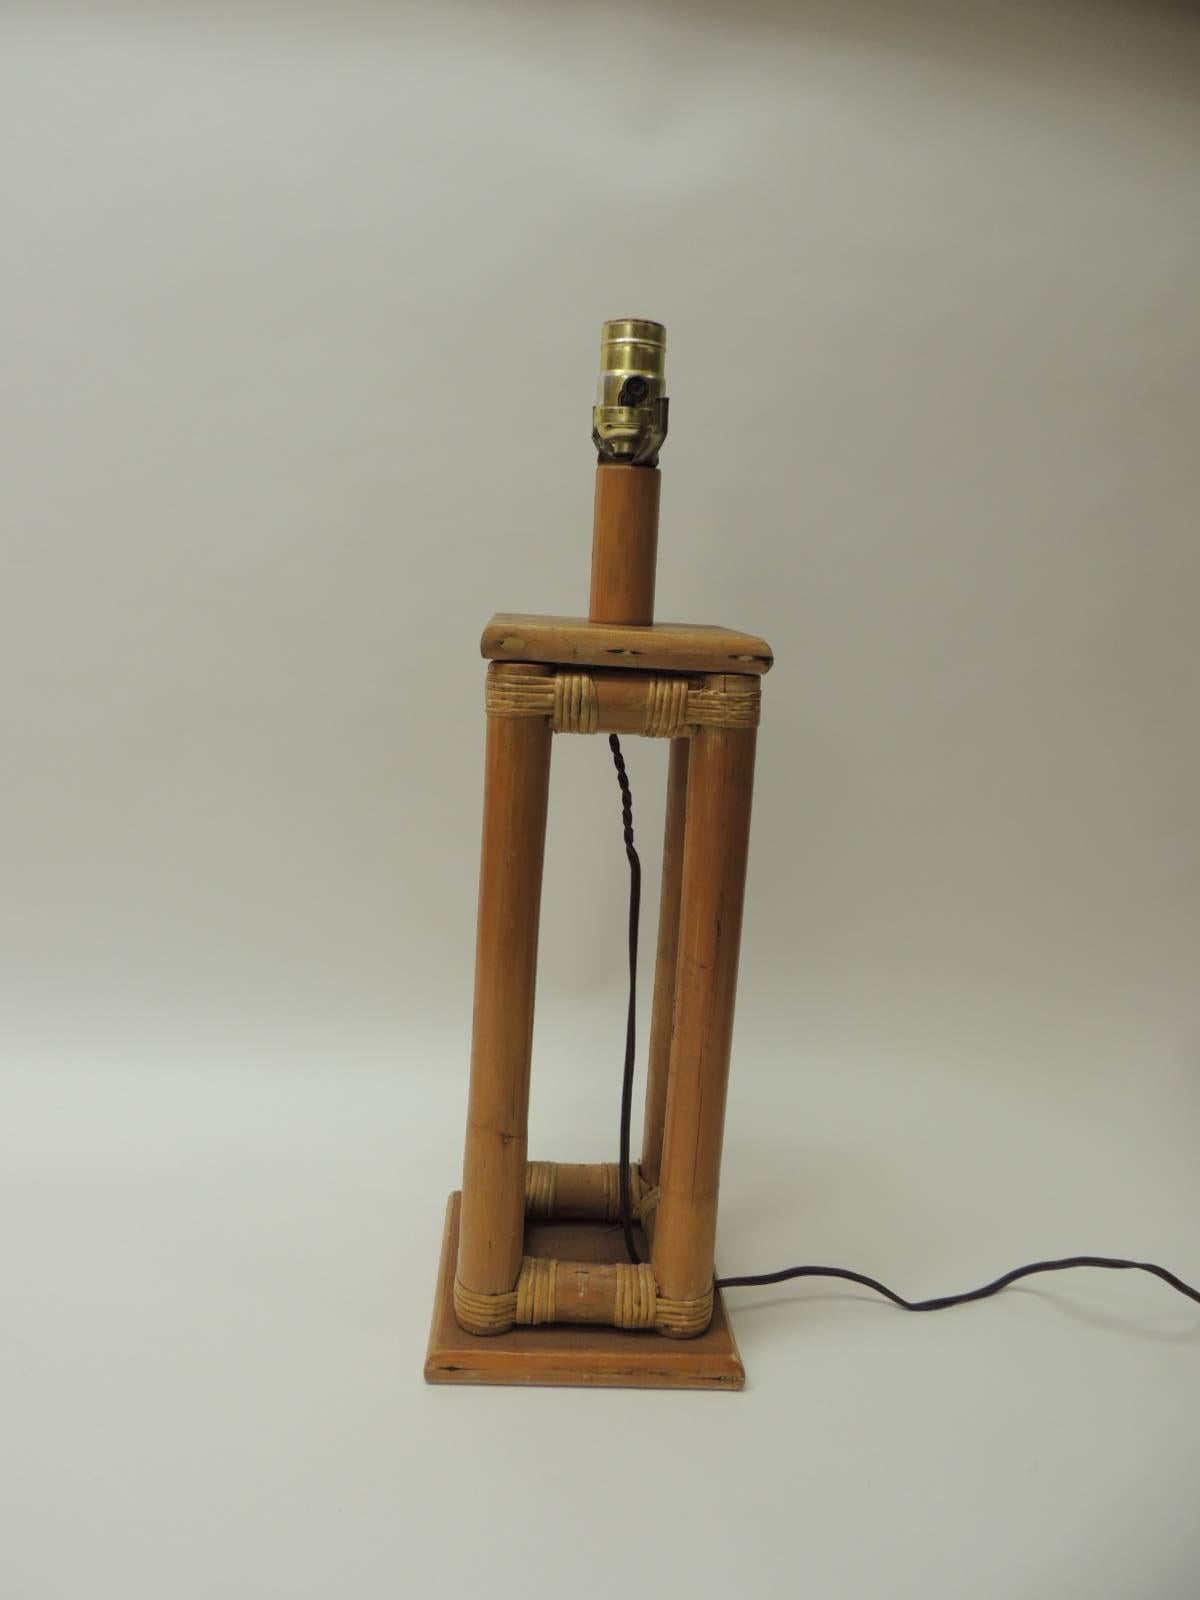 This item is part of our 7th Anniversary SALE:
Vintage square bamboo and rattan square table lamp.
Square base and top.
Works great.  NO LAMP SHADE!
Size: 6.5 x 6.5 x 21 H.